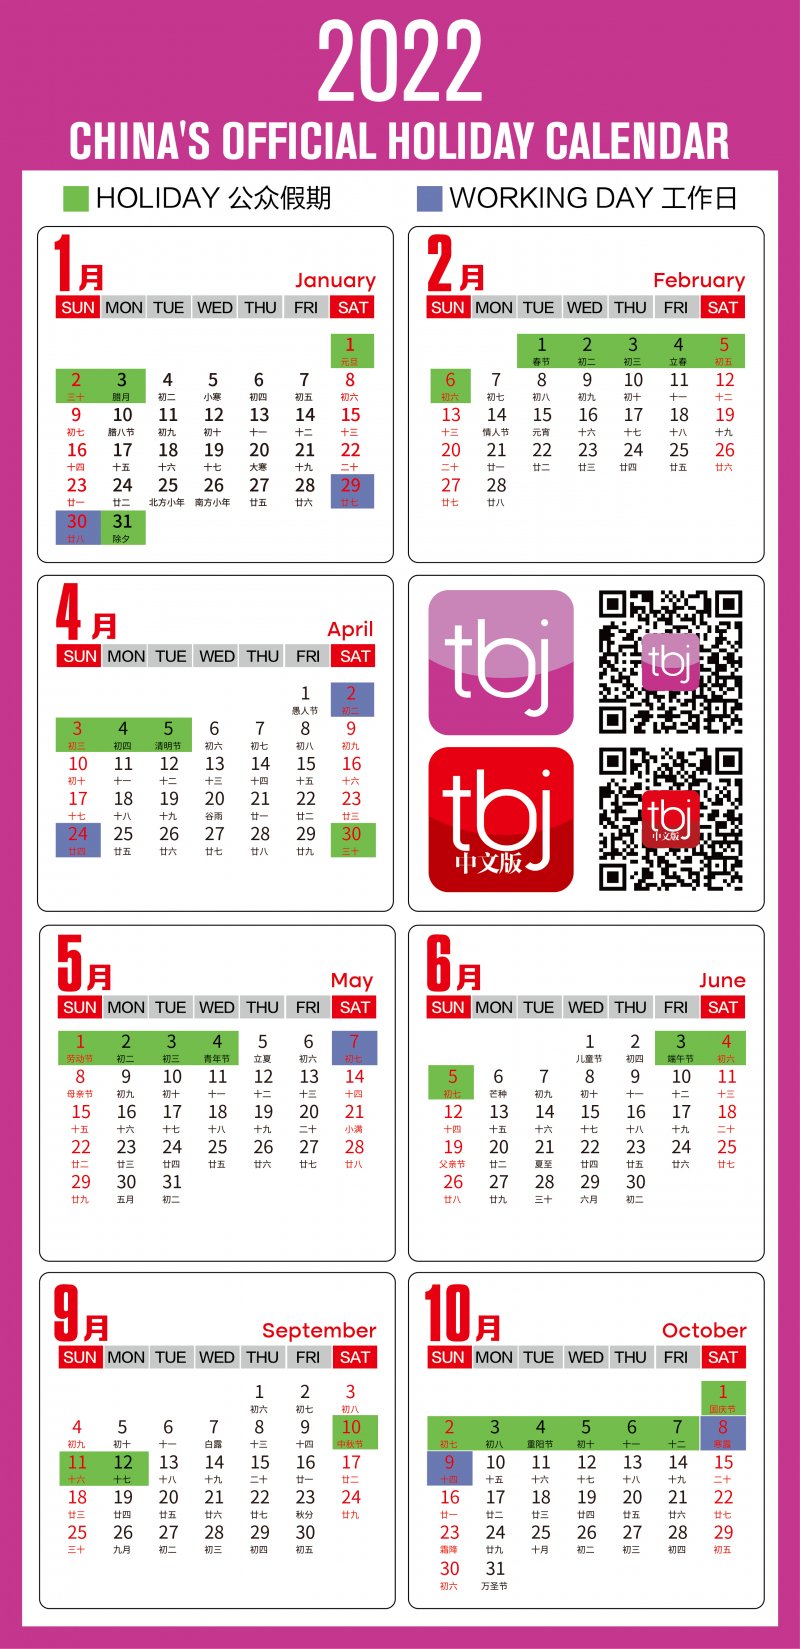 Chinese Holiday Calendar 2022 China's Official 2022 Holiday Calendar Is Big On Three-Day Weekends | The  Beijinger